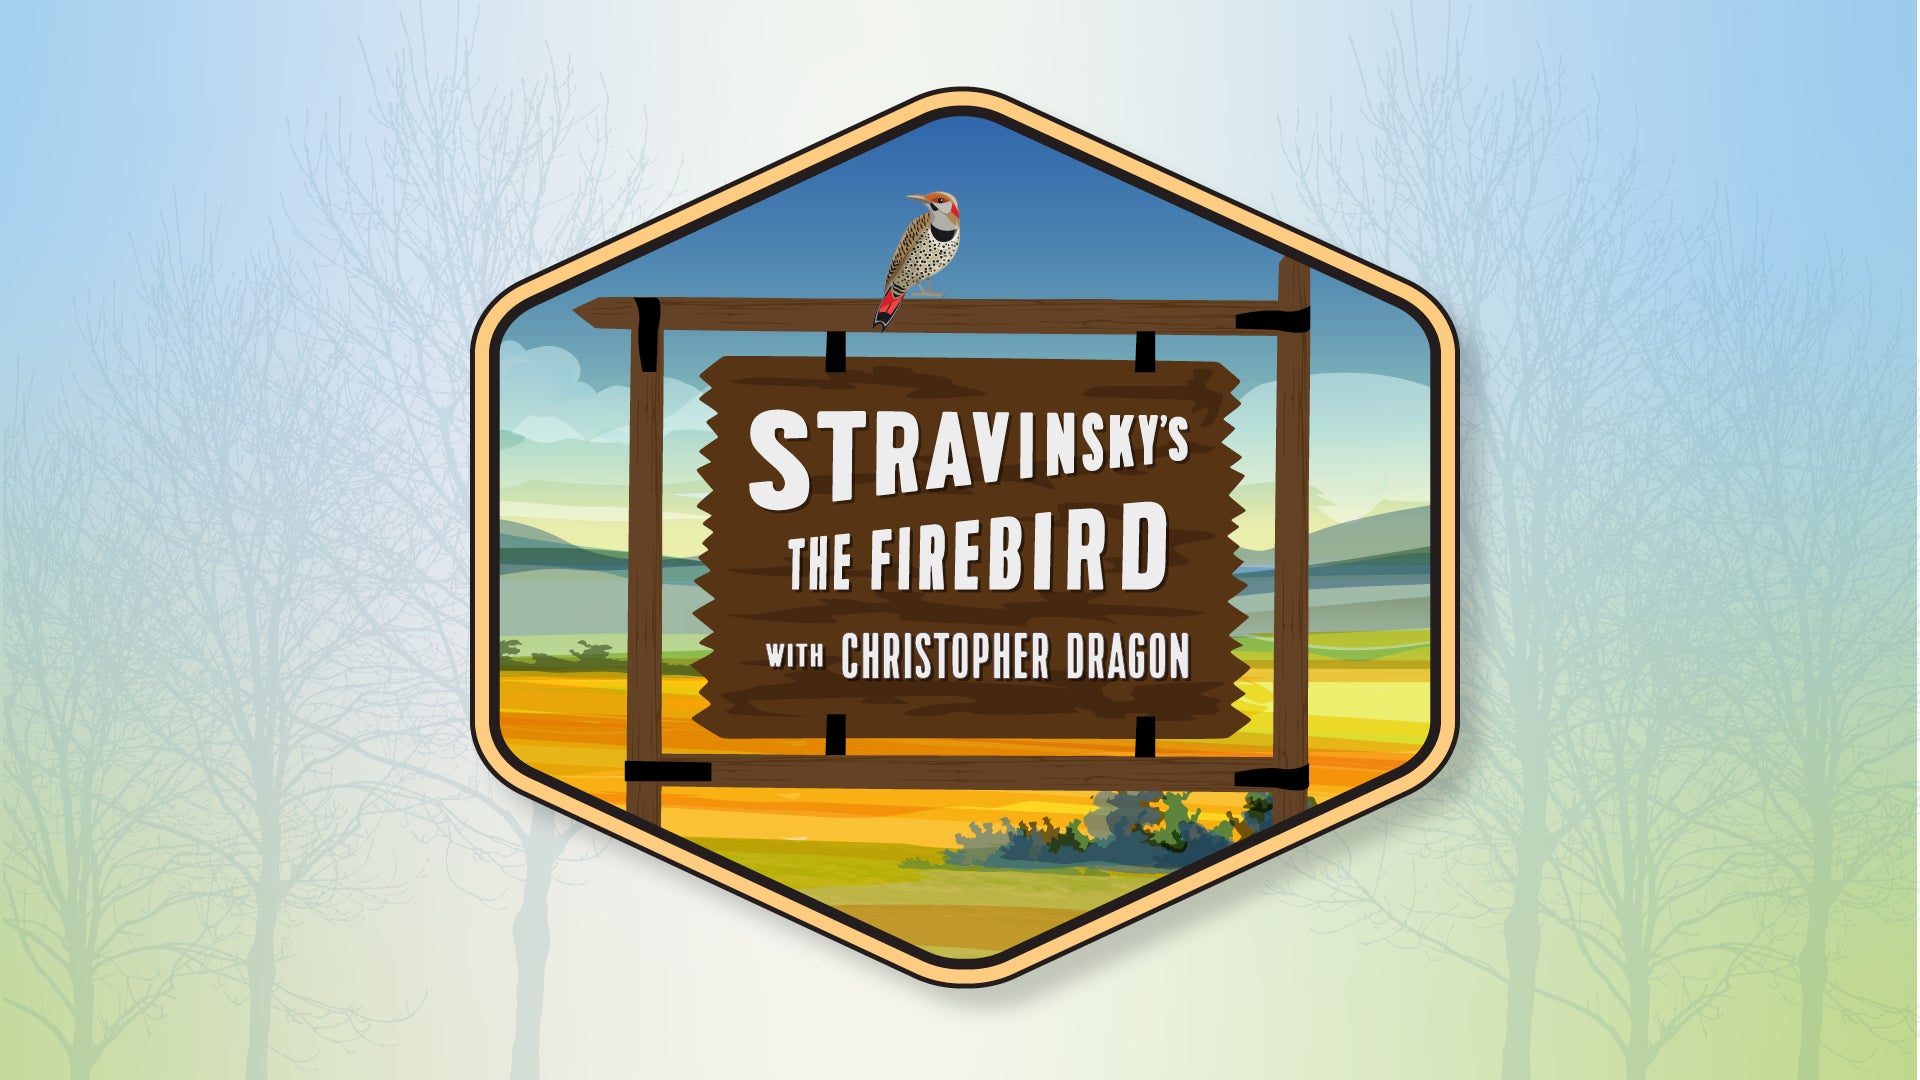 Stravinsky's The Firebird with Christopher Dragon